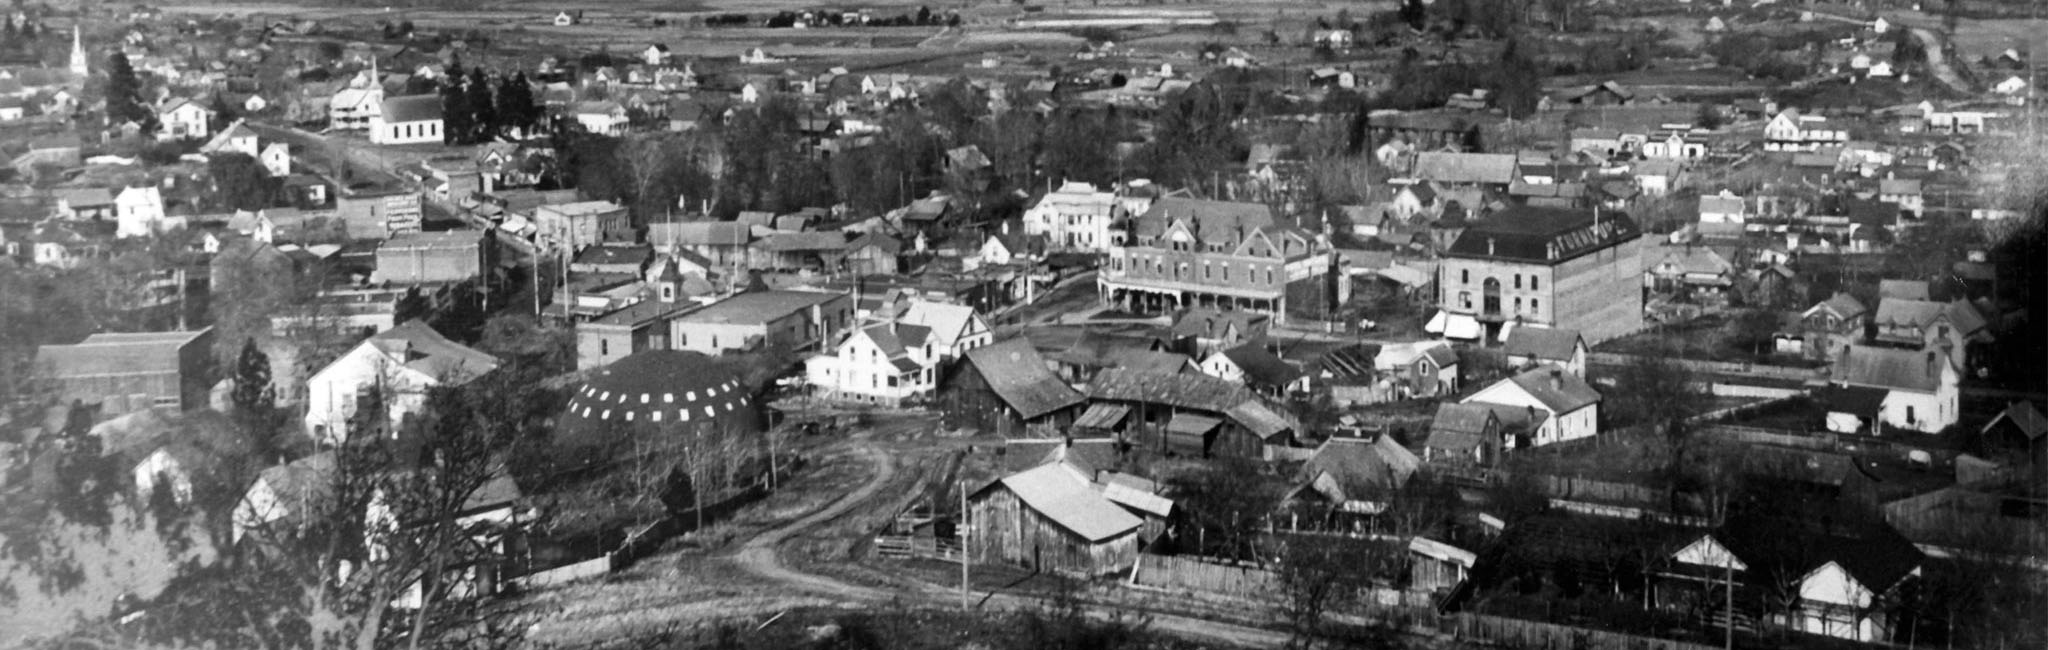 Our History - View of Ashland